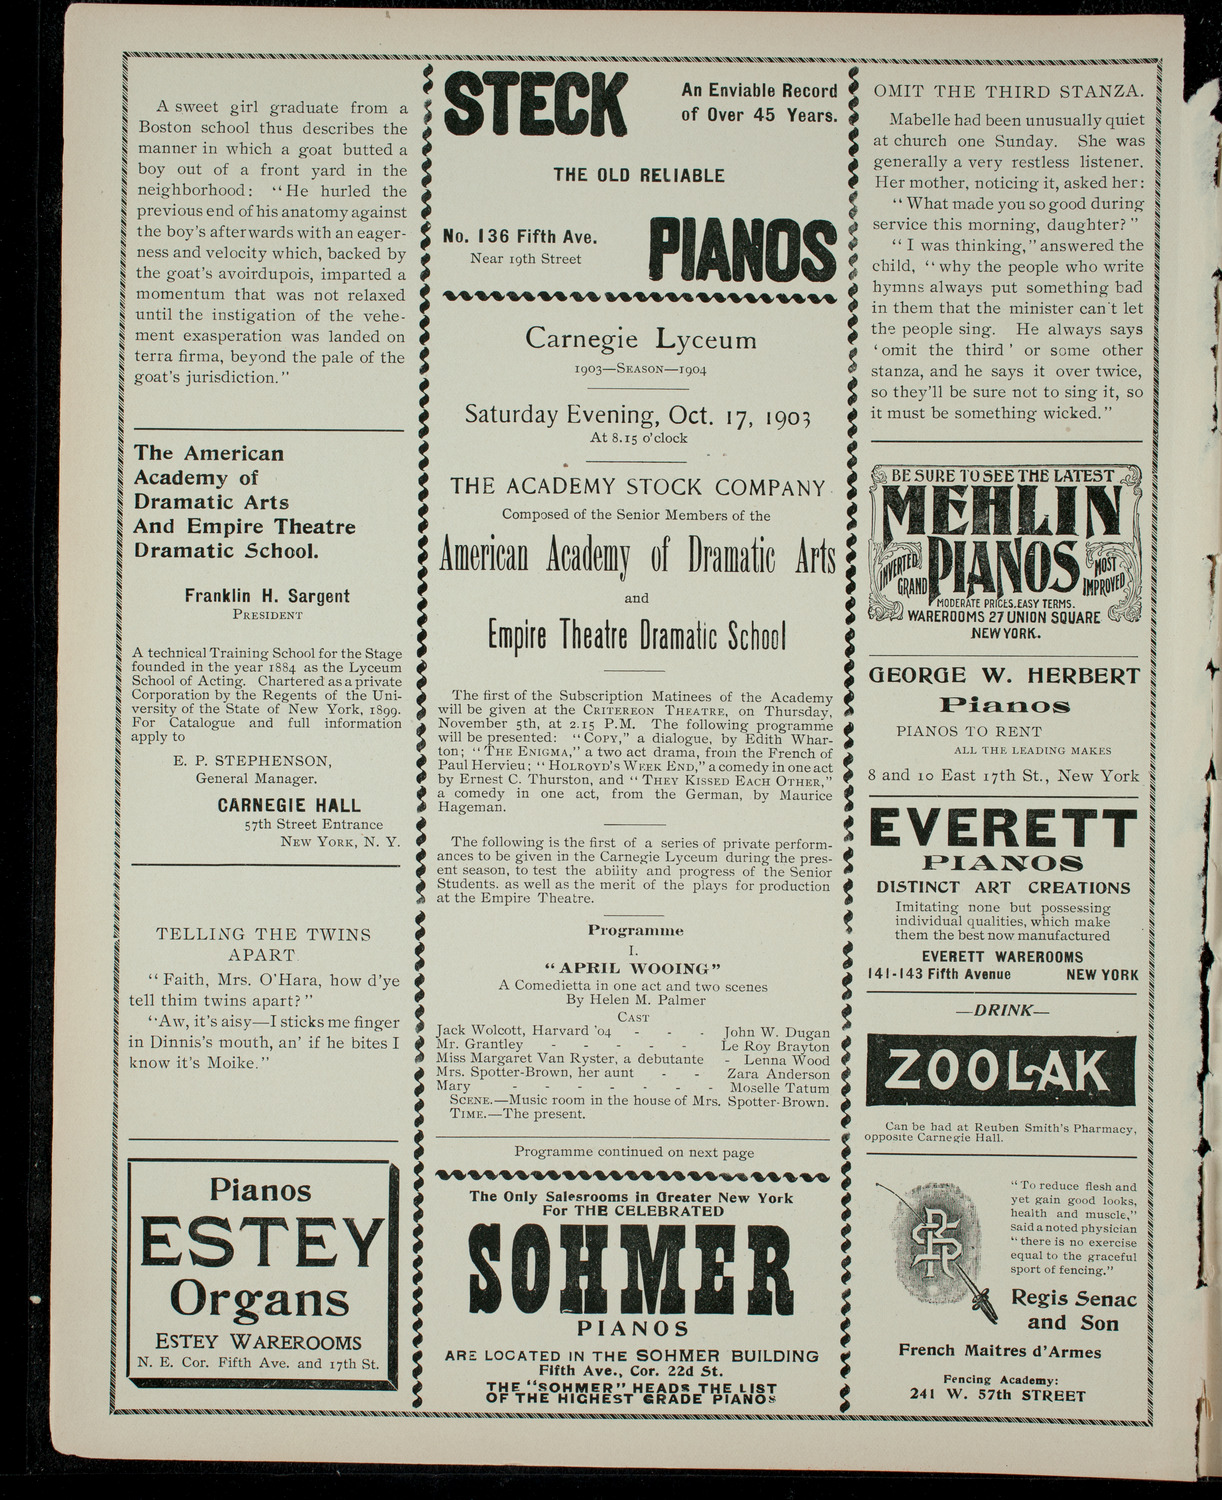 Academy Stock Company of the American Academy of Dramatic Arts and Empire Theatre Dramatic School, October 17, 1903, program page 2